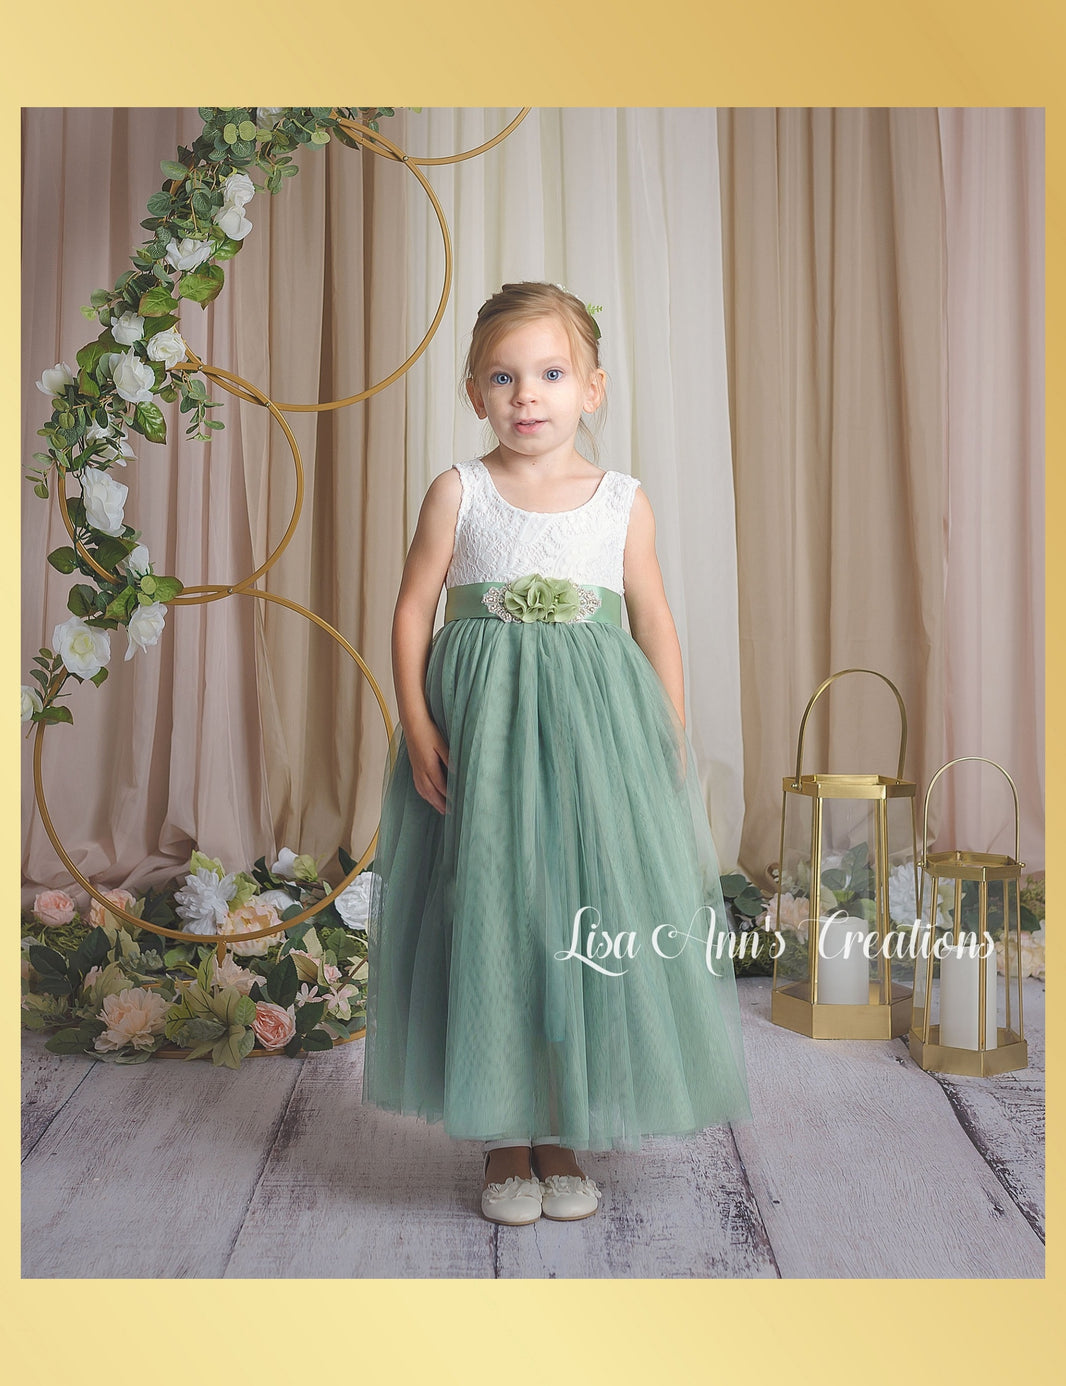 Lisa Ann's Creations: Flower Girl and Special Occasion Dresses